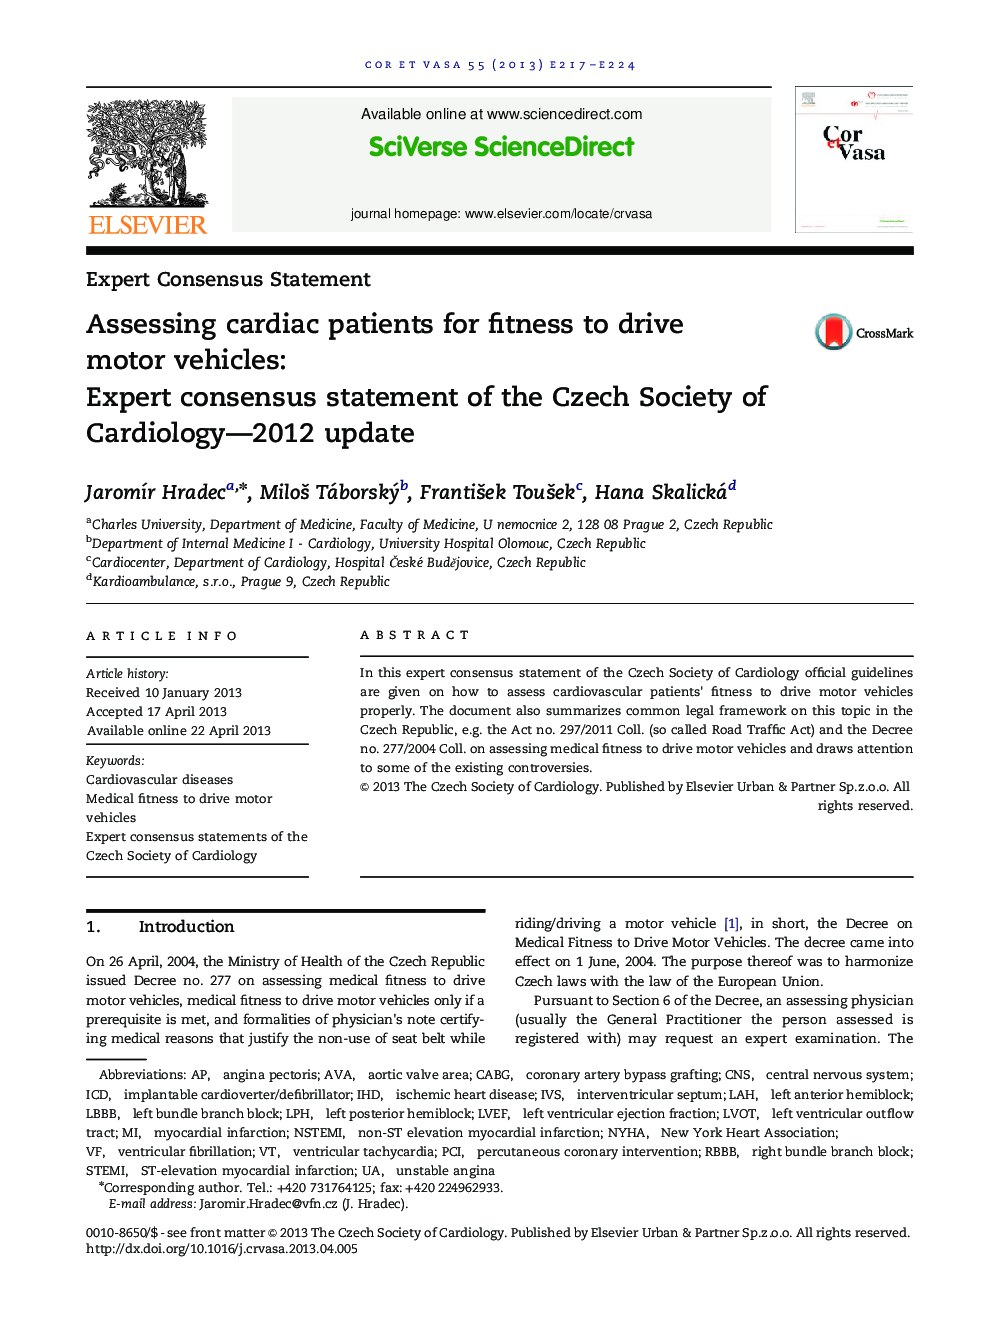 Expert Consensus StatementAssessing cardiac patients for fitness to drive motor vehicles:: Expert consensus statement of the Czech Society of Cardiology-2012 update